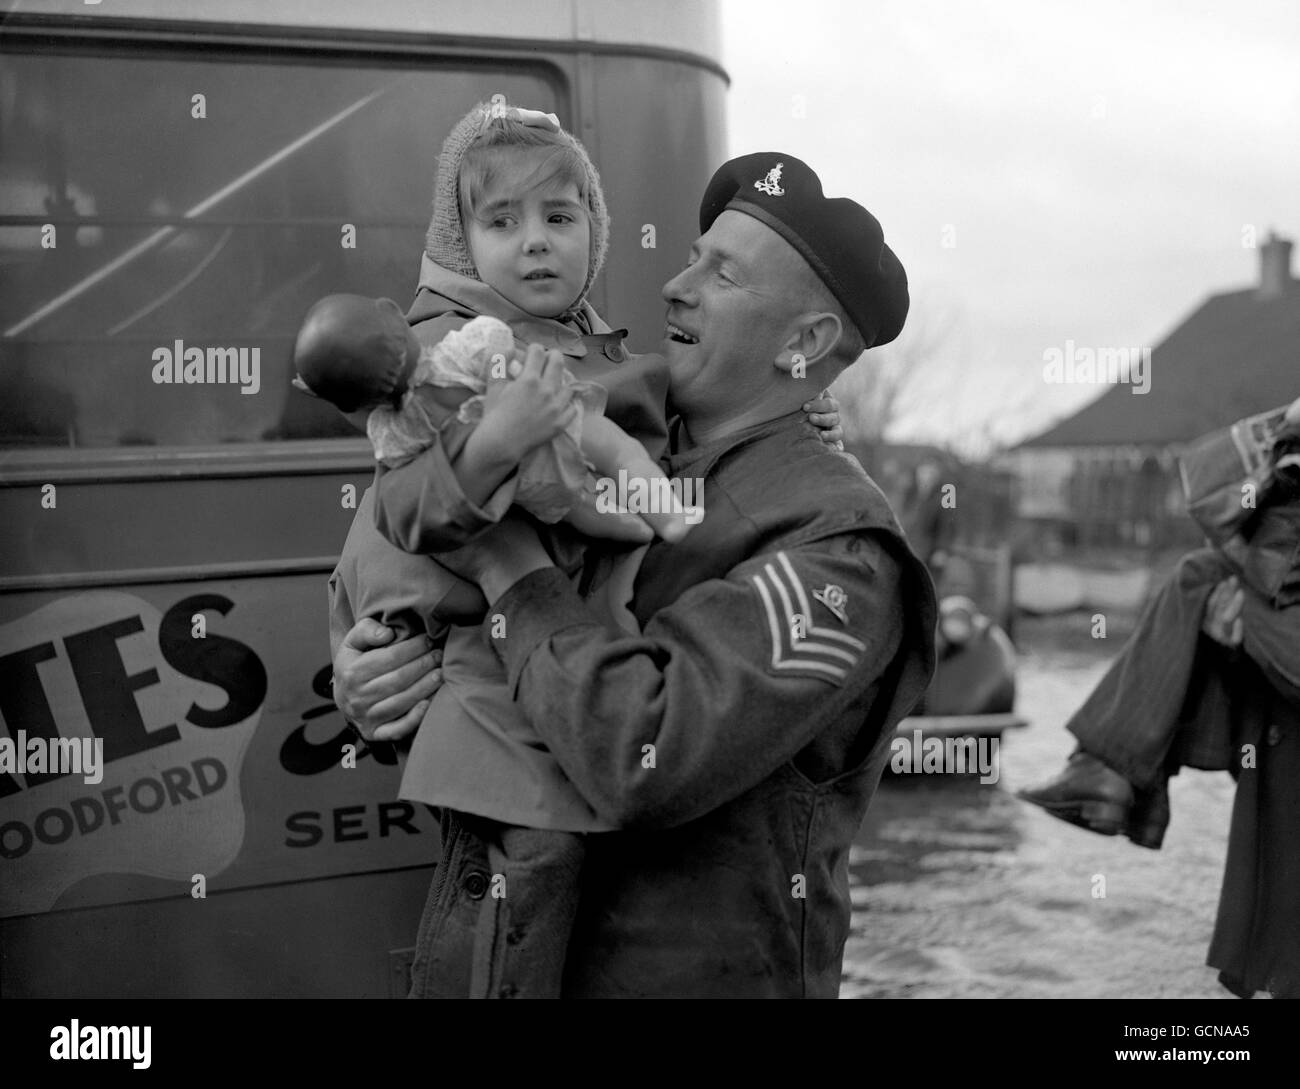 A Royal Artillery sergeant carries a small evacuee, who remembered her doll, to an evacuation bus. The last 2,000 inhabitants were compulsorily evacuated by police, troops and other services from Canvey Island, Essex, where more than 100 people are known to have died in the flood disaster. About 500 people are missing. Stock Photo